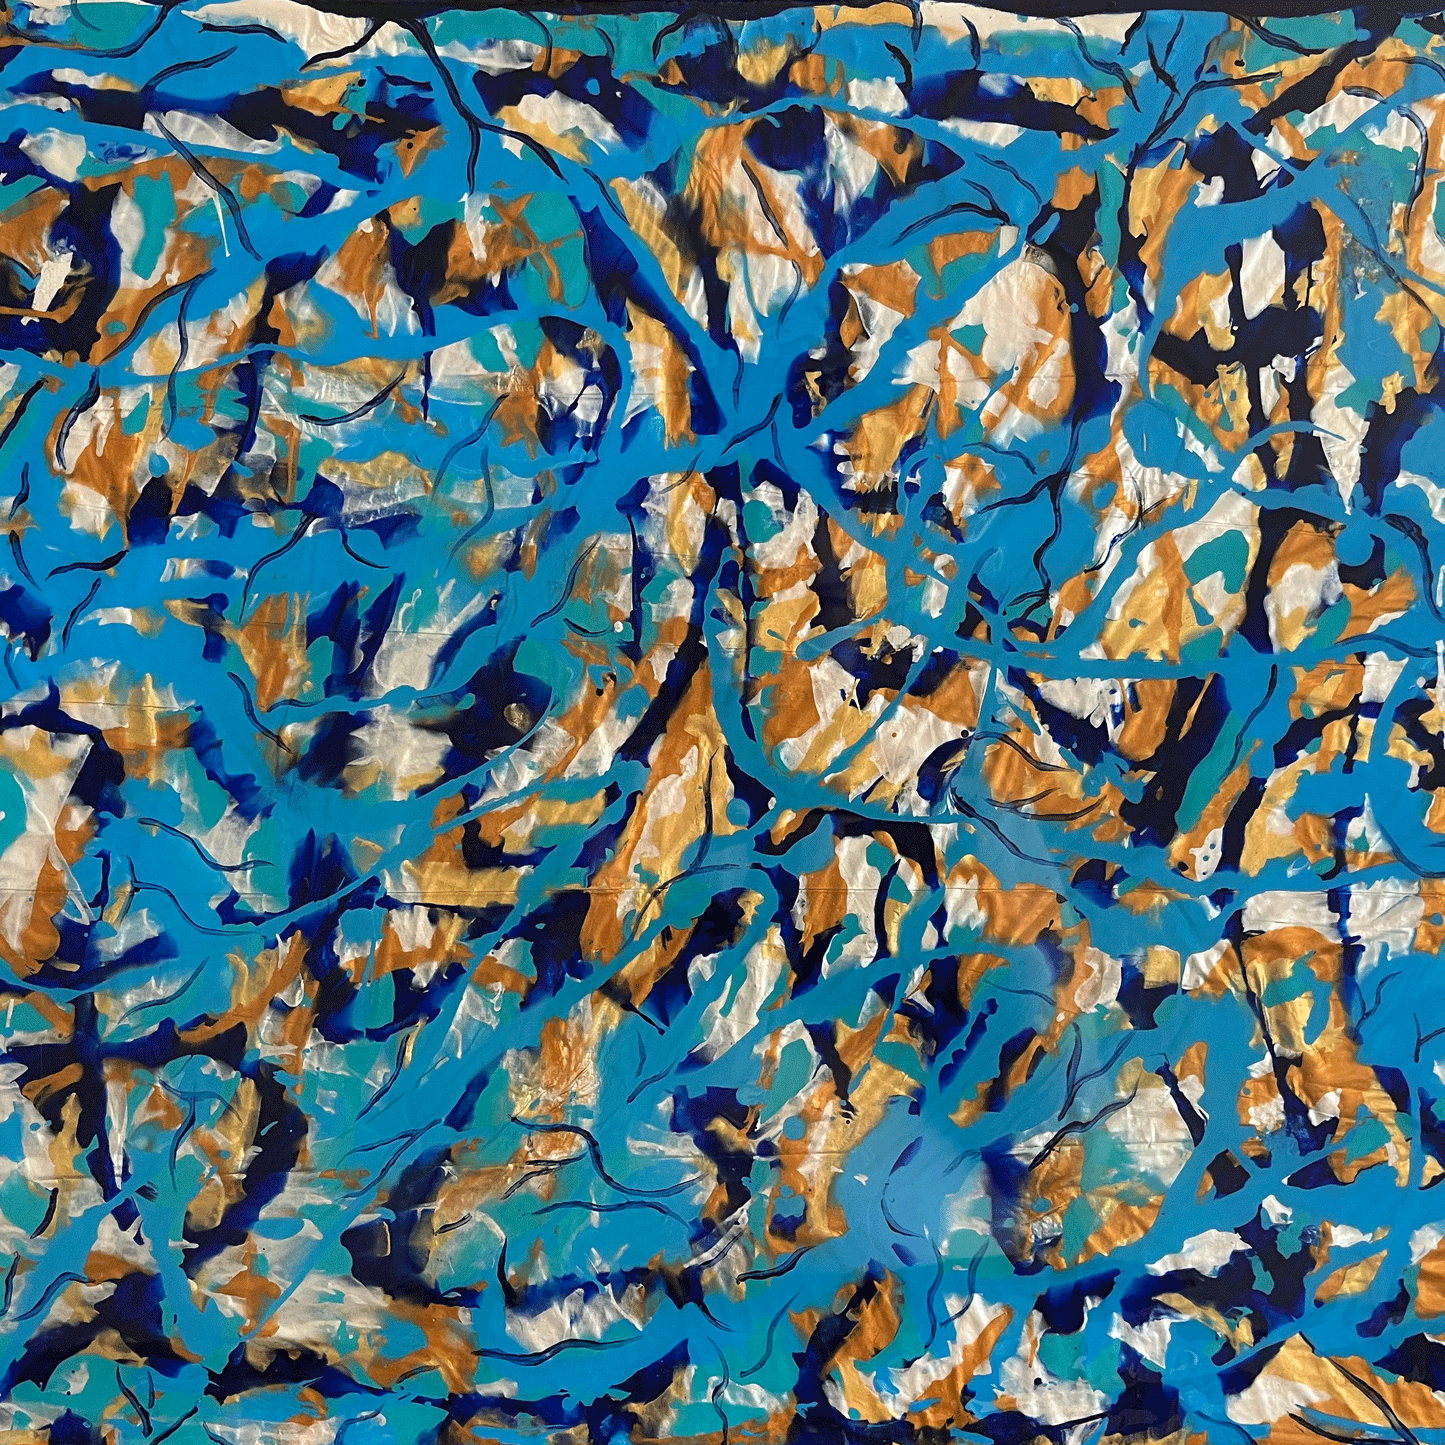 Original-Abstract-Paintings-for-Sale-Toronto-Canada-Buy-Art-Online-Unique-Artists-Artworks-Blue-Chaos-Alexandra-Romano